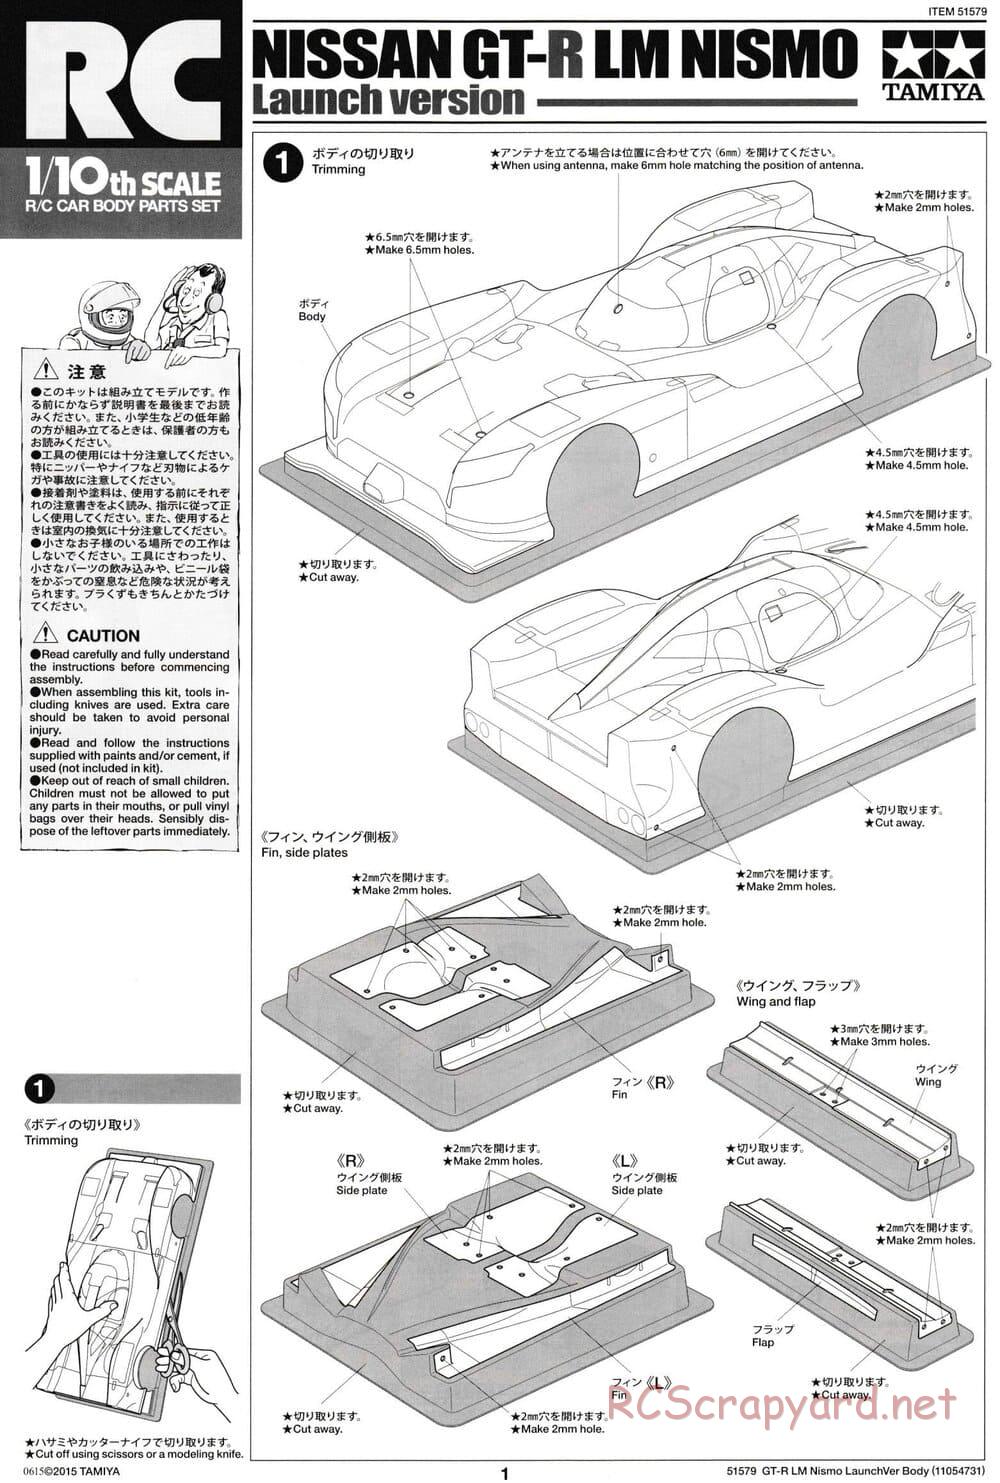 Tamiya - Nissan GT-R LM Nismo Launch Version - F103GT Chassis - Body Manual - Page 1